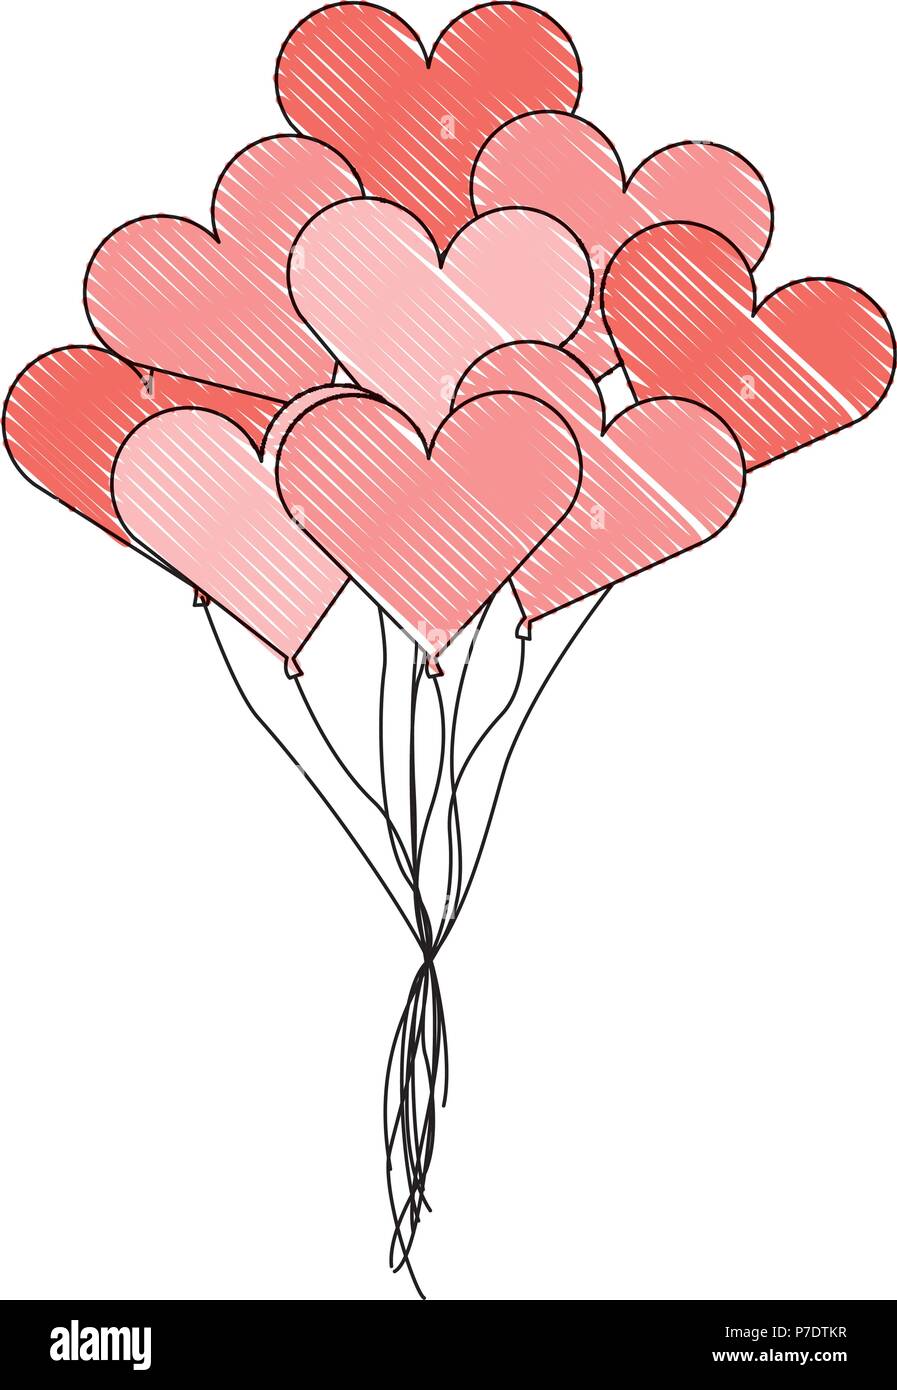 Featured image of post Heart Balloon Images Drawing - Find images of heart balloon.